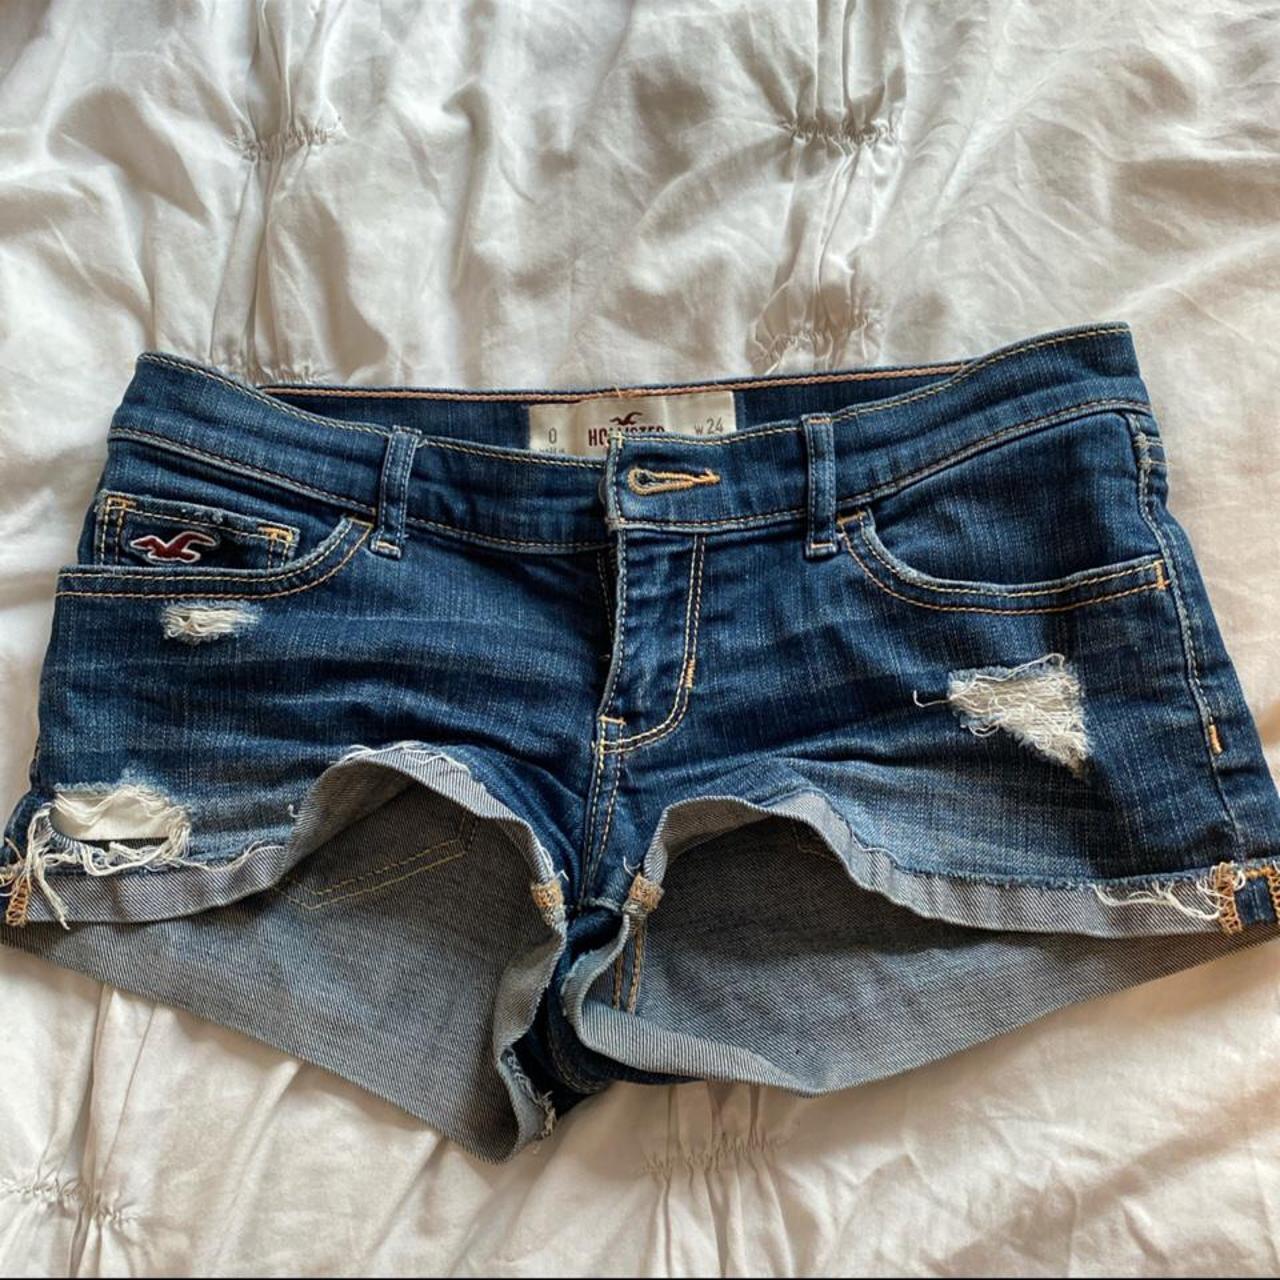 Hollister low rise booty shorts in size 0. They’re... - Depop